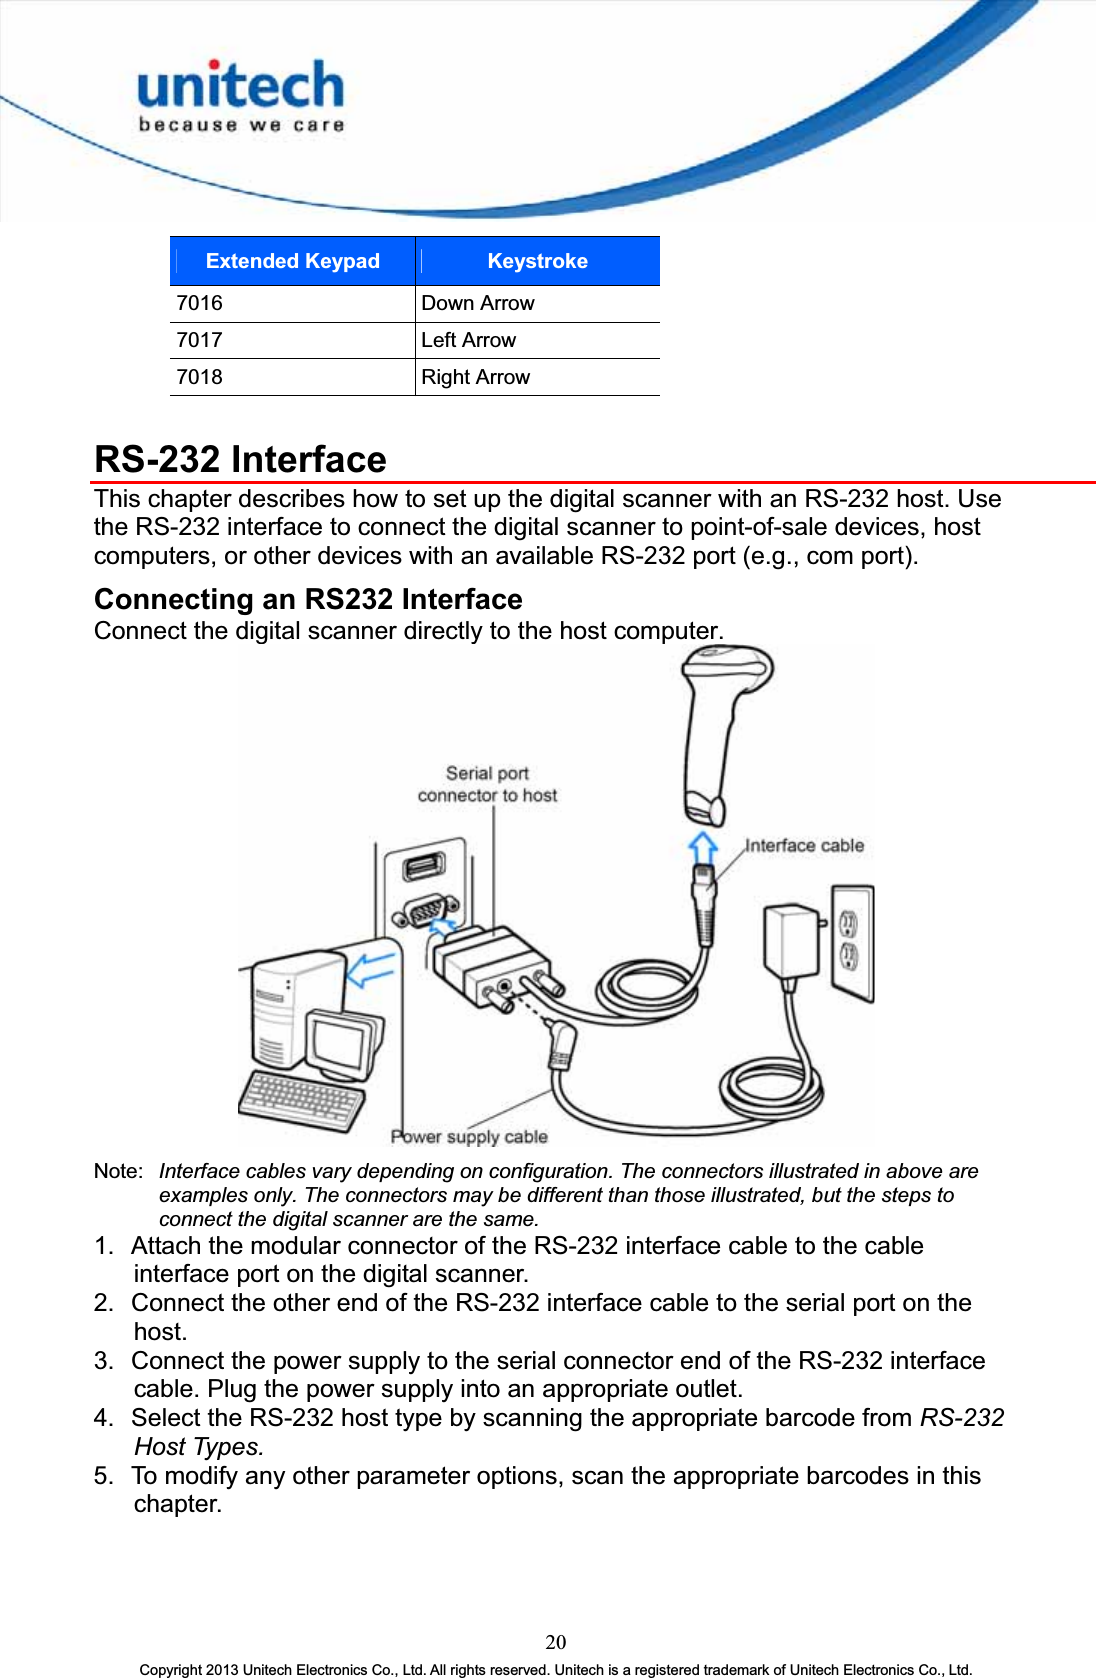 20Copyright 2013 Unitech Electronics Co., Ltd. All rights reserved. Unitech is a registered trademark of Unitech Electronics Co., Ltd. Extended Keypad Keystroke7016 Down Arrow 7017 Left Arrow 7018 Right Arrow RS-232 Interface This chapter describes how to set up the digital scanner with an RS-232 host. Use the RS-232 interface to connect the digital scanner to point-of-sale devices, host computers, or other devices with an available RS-232 port (e.g., com port). Connecting an RS232 Interface Connect the digital scanner directly to the host computer. Note: Interface cables vary depending on configuration. The connectors illustrated in above are examples only. The connectors may be different than those illustrated, but the steps to connect the digital scanner are the same. 1.  Attach the modular connector of the RS-232 interface cable to the cable interface port on the digital scanner. 2.  Connect the other end of the RS-232 interface cable to the serial port on the host.3.  Connect the power supply to the serial connector end of the RS-232 interface cable. Plug the power supply into an appropriate outlet. 4.  Select the RS-232 host type by scanning the appropriate barcode from RS-232Host Types.5.  To modify any other parameter options, scan the appropriate barcodes in this chapter. 